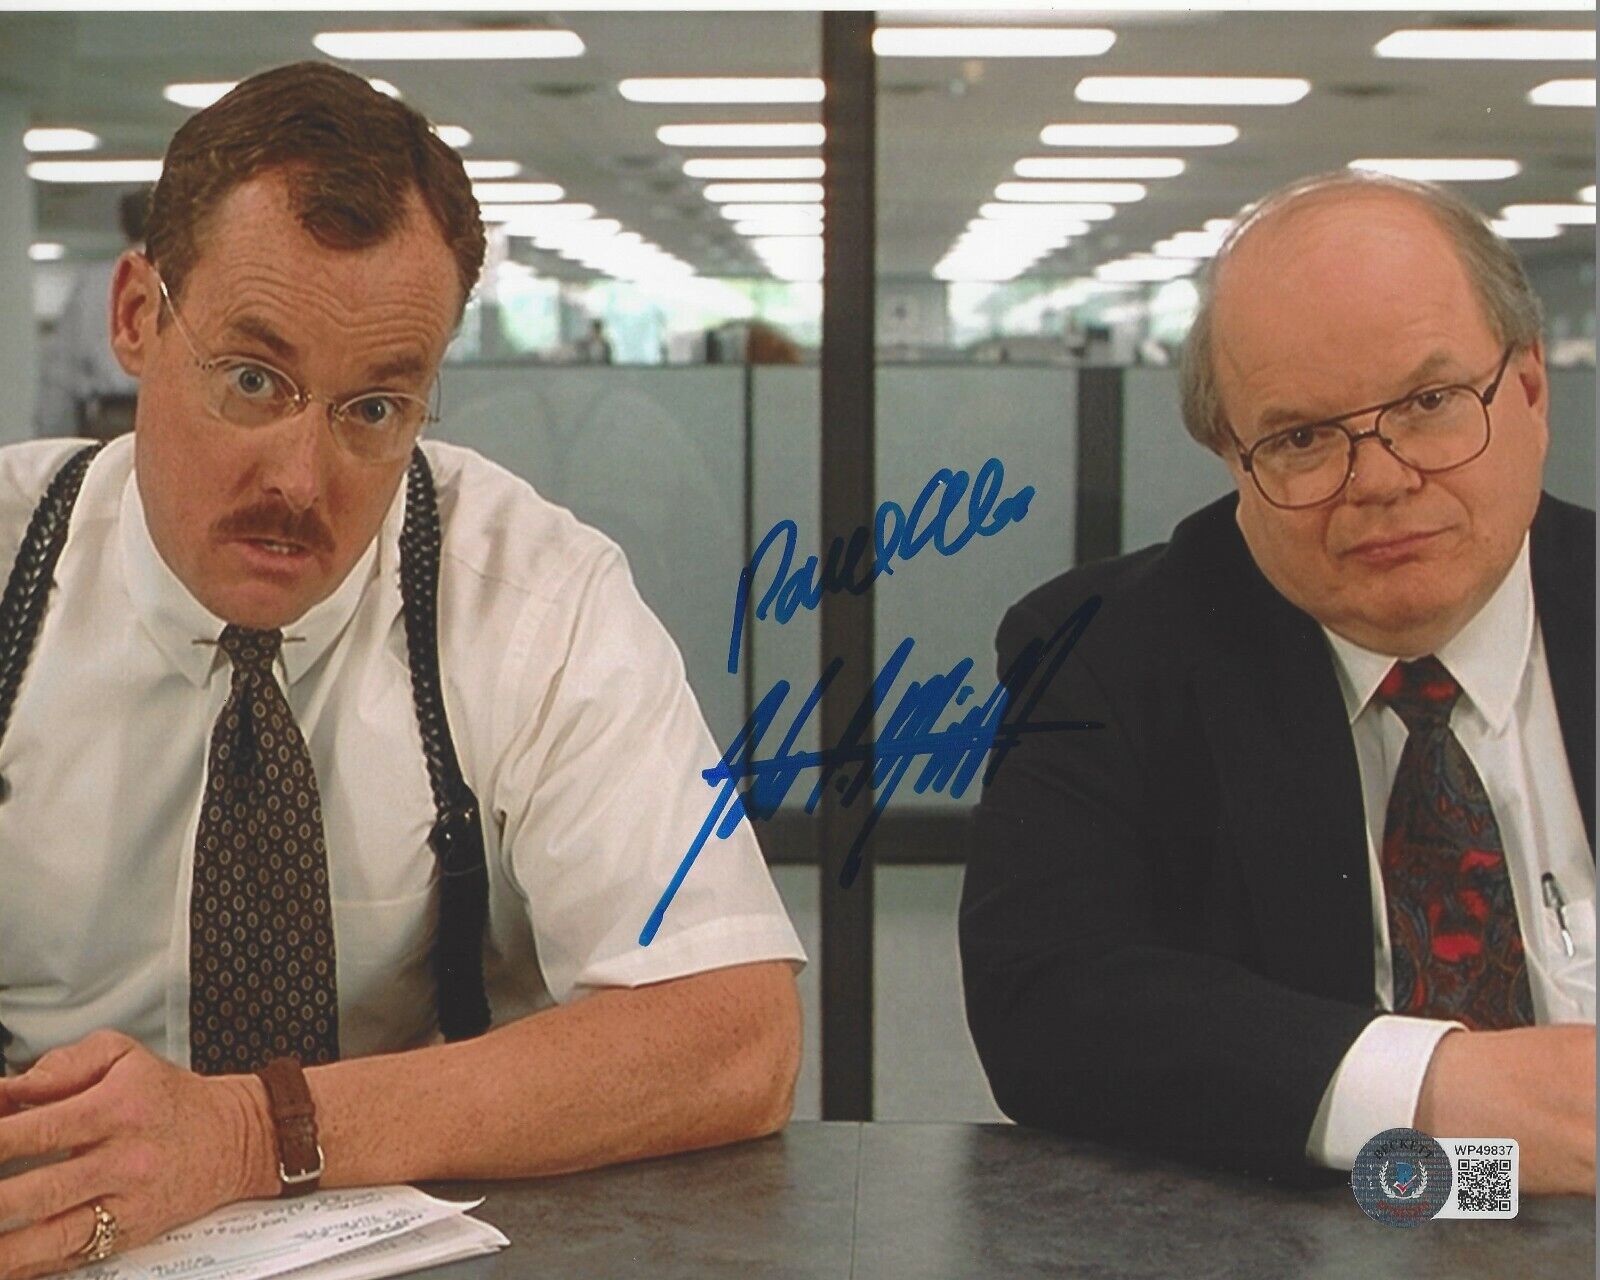 OFFICE SPACE CAST SIGNED THE BOBS 8x10 MOVIE Photo Poster painting x2 BECKETT COA JOHN MCGINLEY